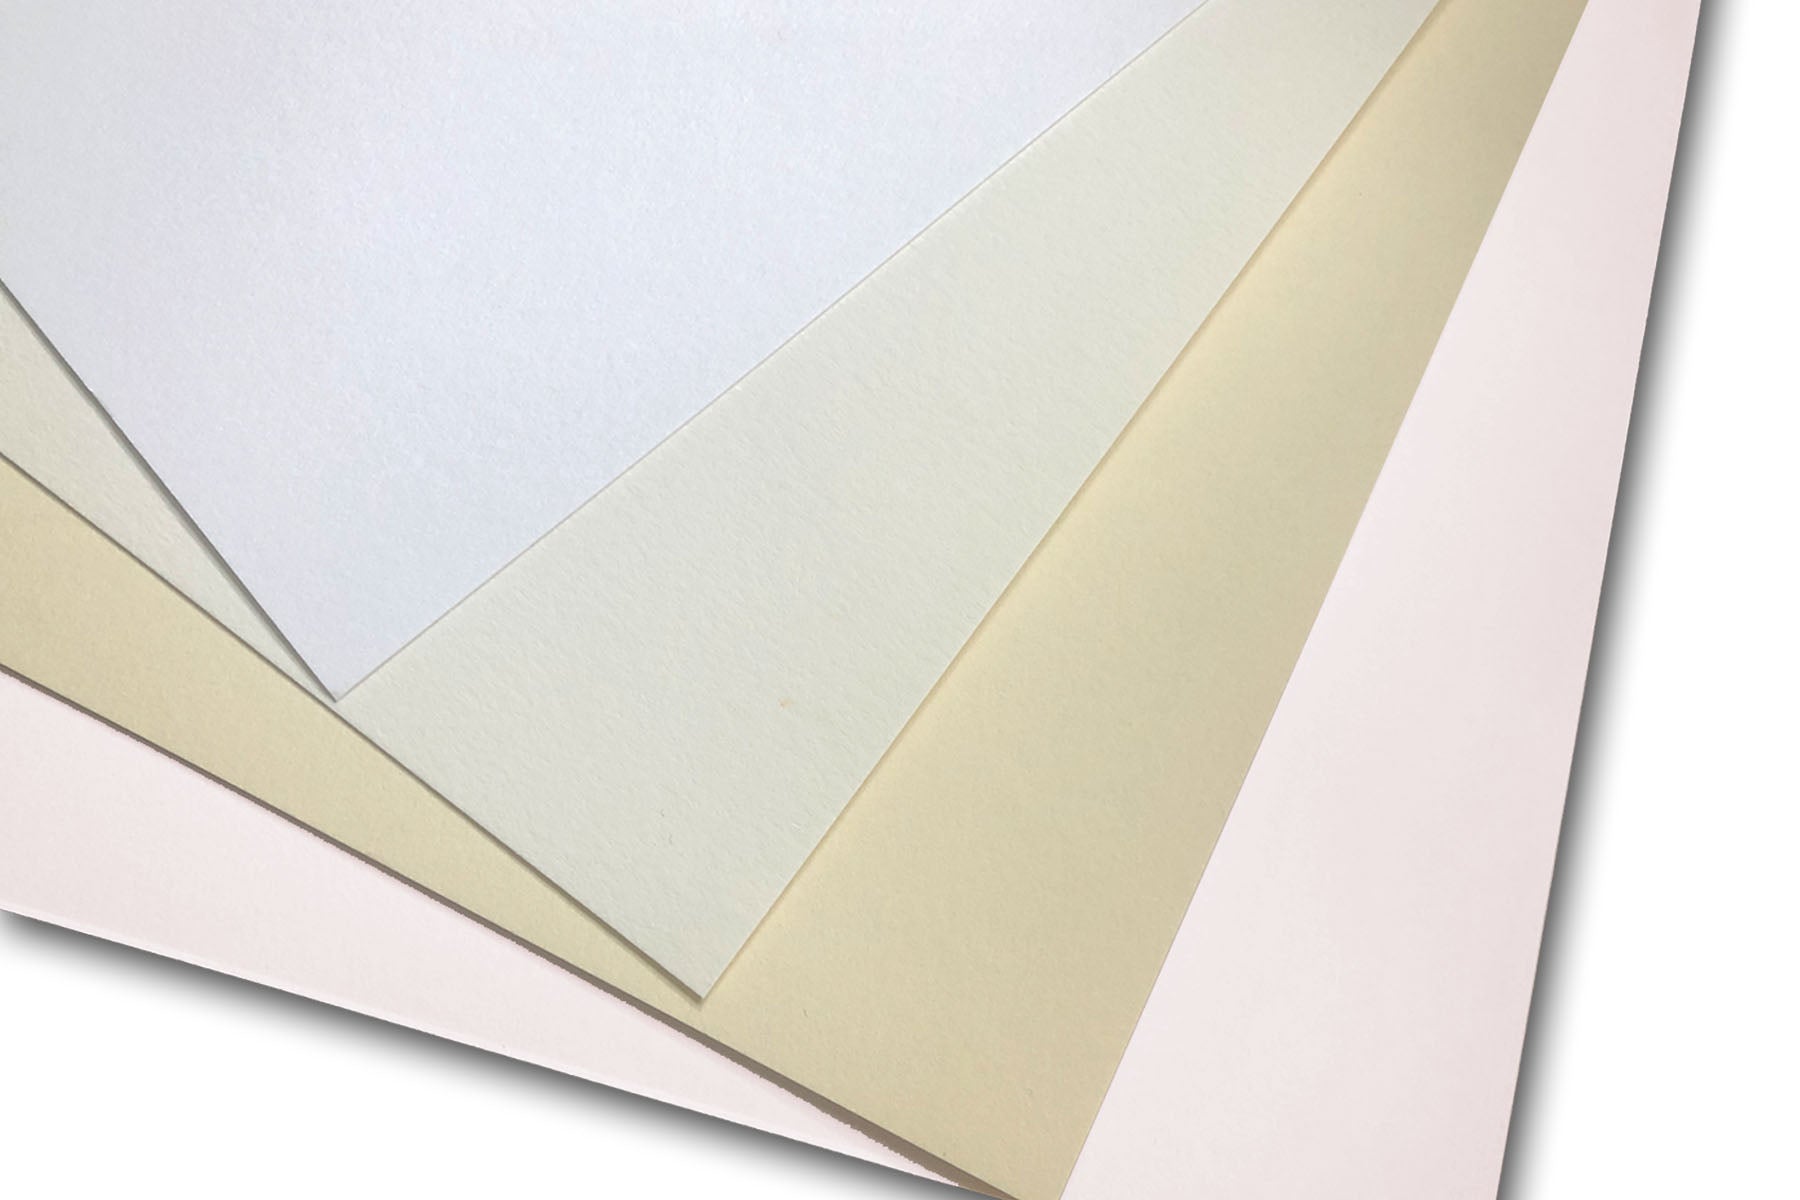 White Cardstock - Thick Paper for School, Arts and Crafts, Invitations, Stationary Printing | 65 lb Card Stock | 8.5 x 11 inch | Medium Weight Cover